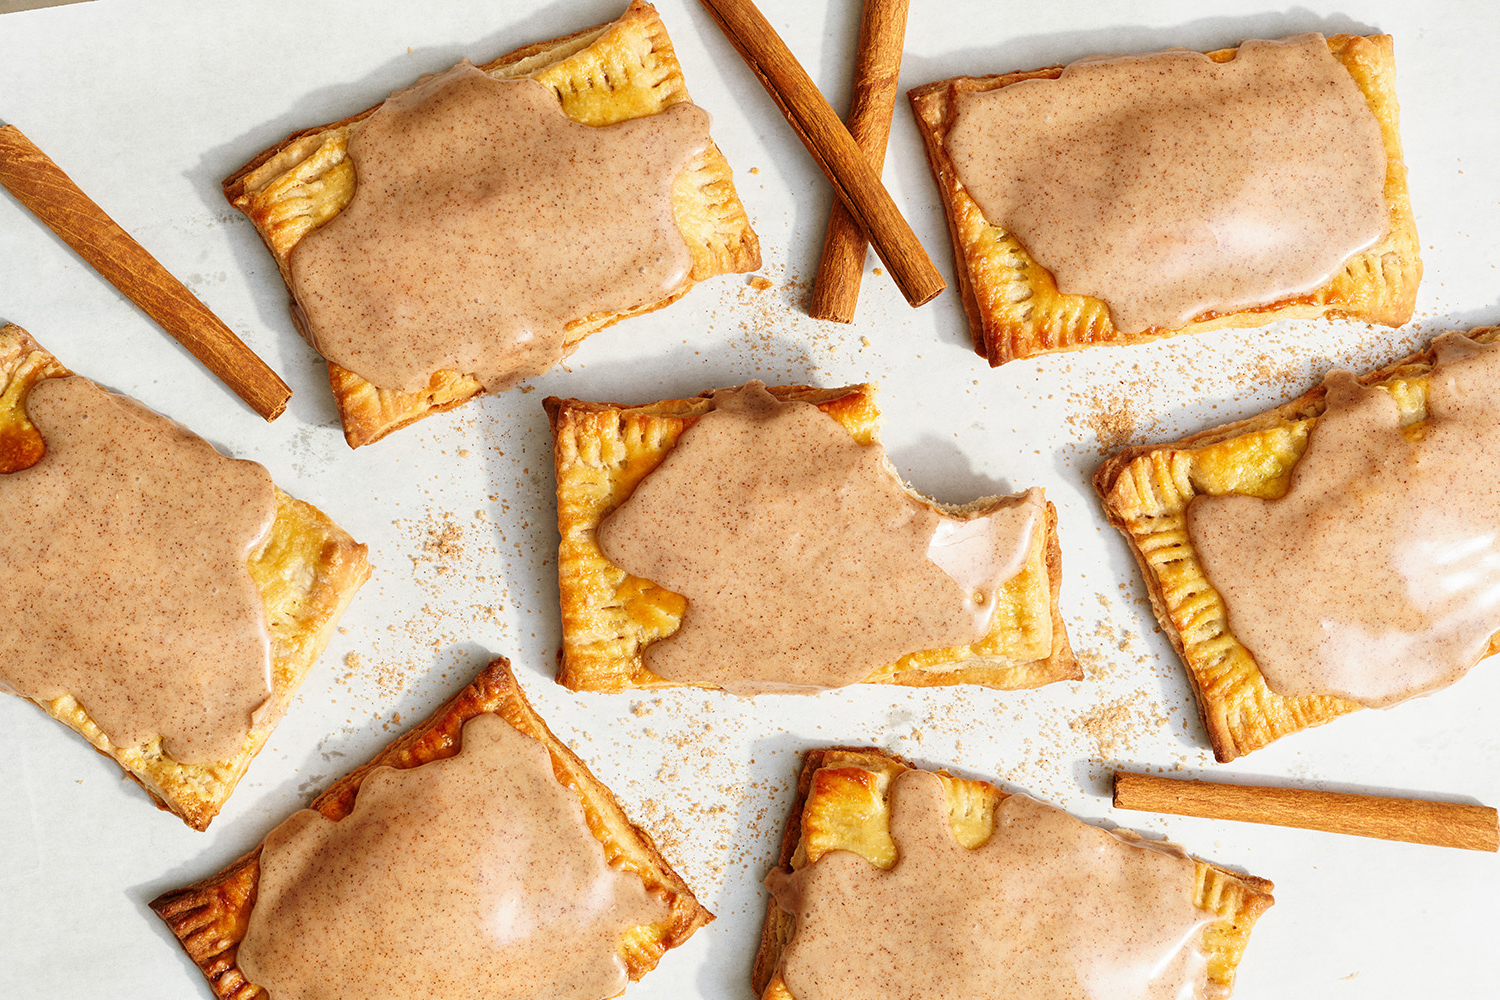 several glazed Pop Tarts with some cinnamon sticks between, ready to be served.